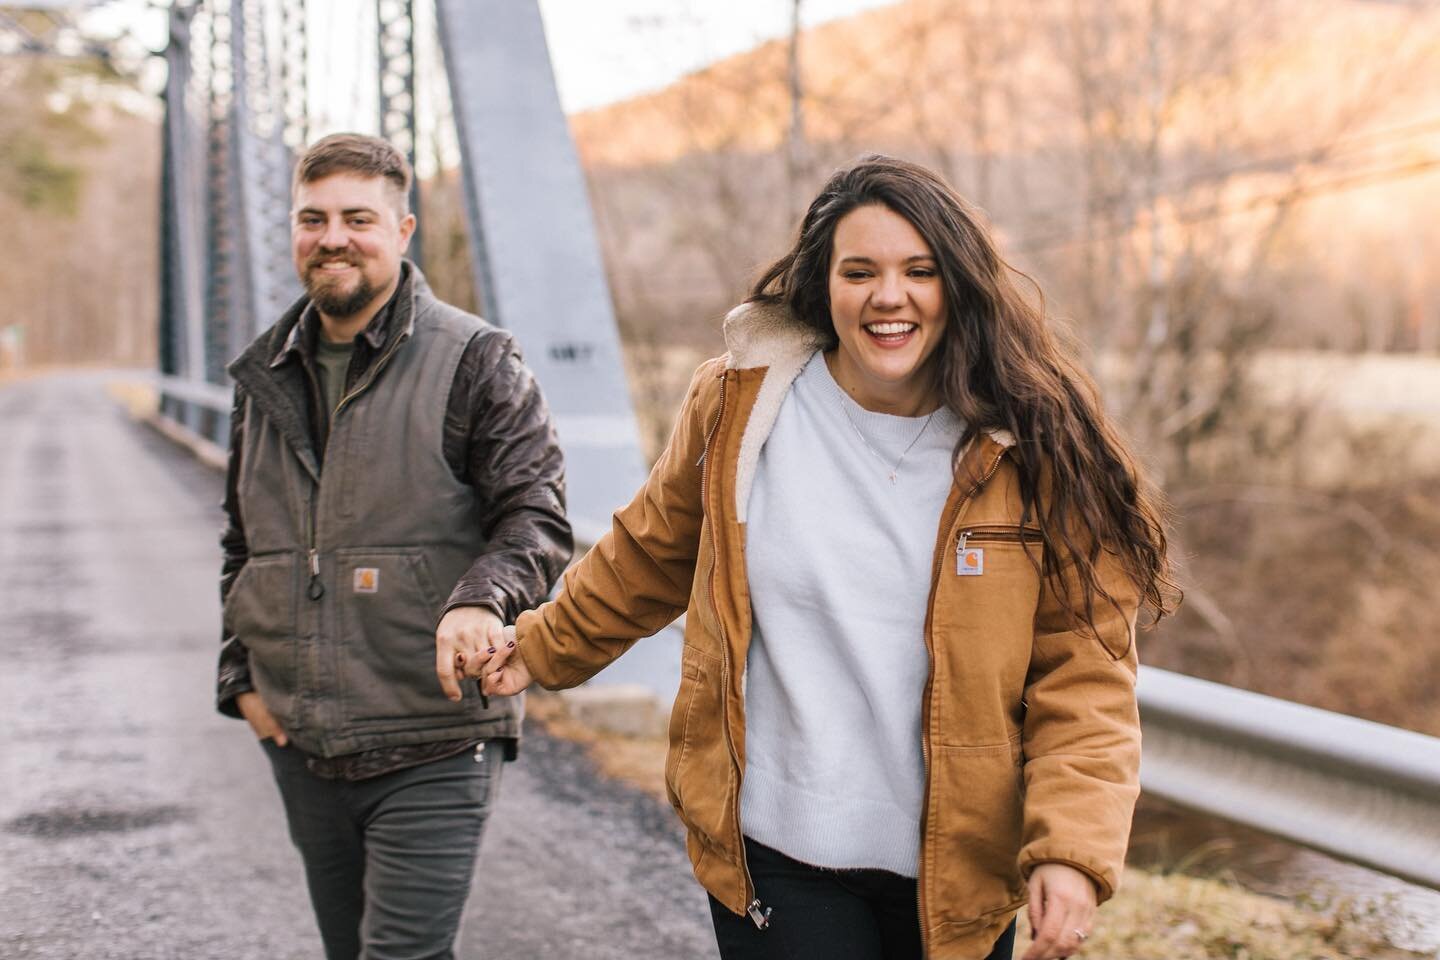 Loving finding these lovely new spots to adventure with couples in the Harrisonburg area 📷

Come adventure with me! DM to inquire about availability for engagements and weddings!